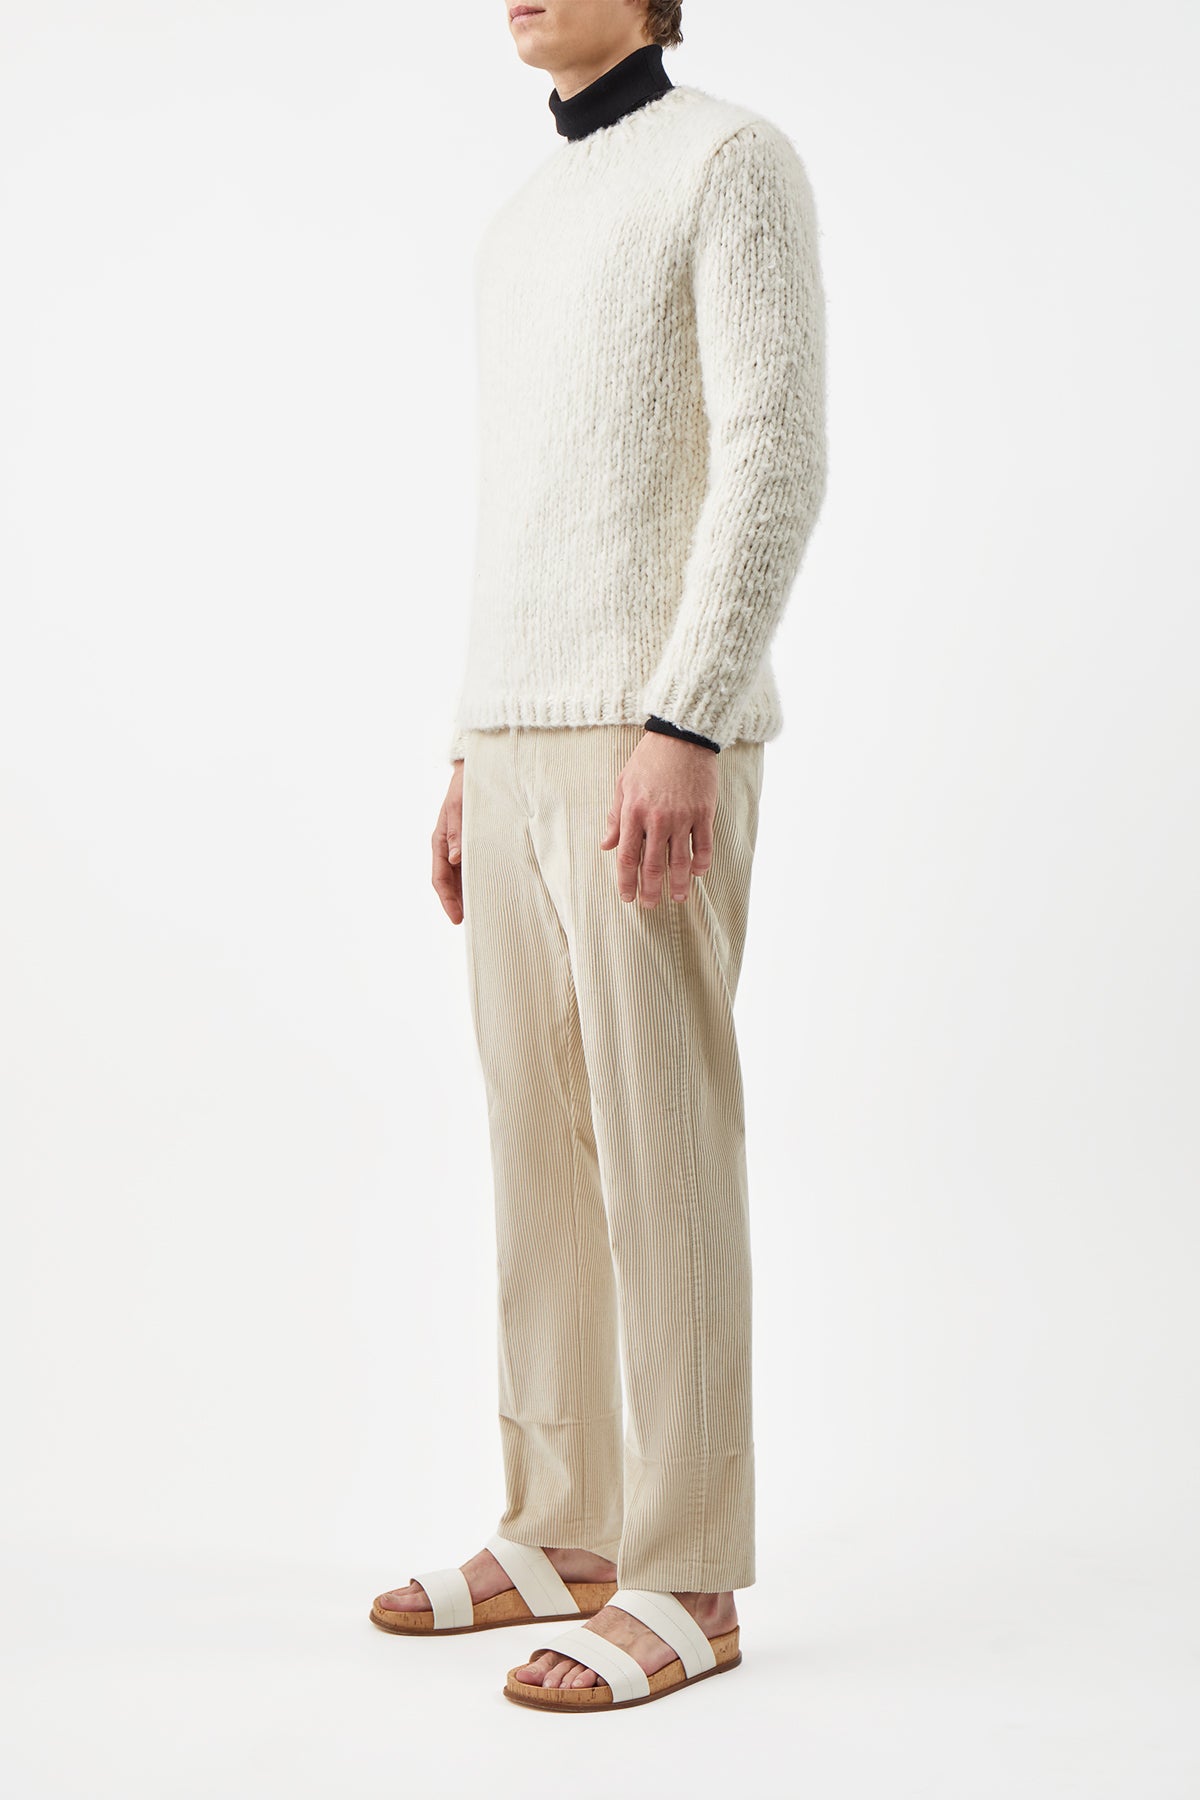 Lawrence Knit Sweater in Ivory Welfat Cashmere